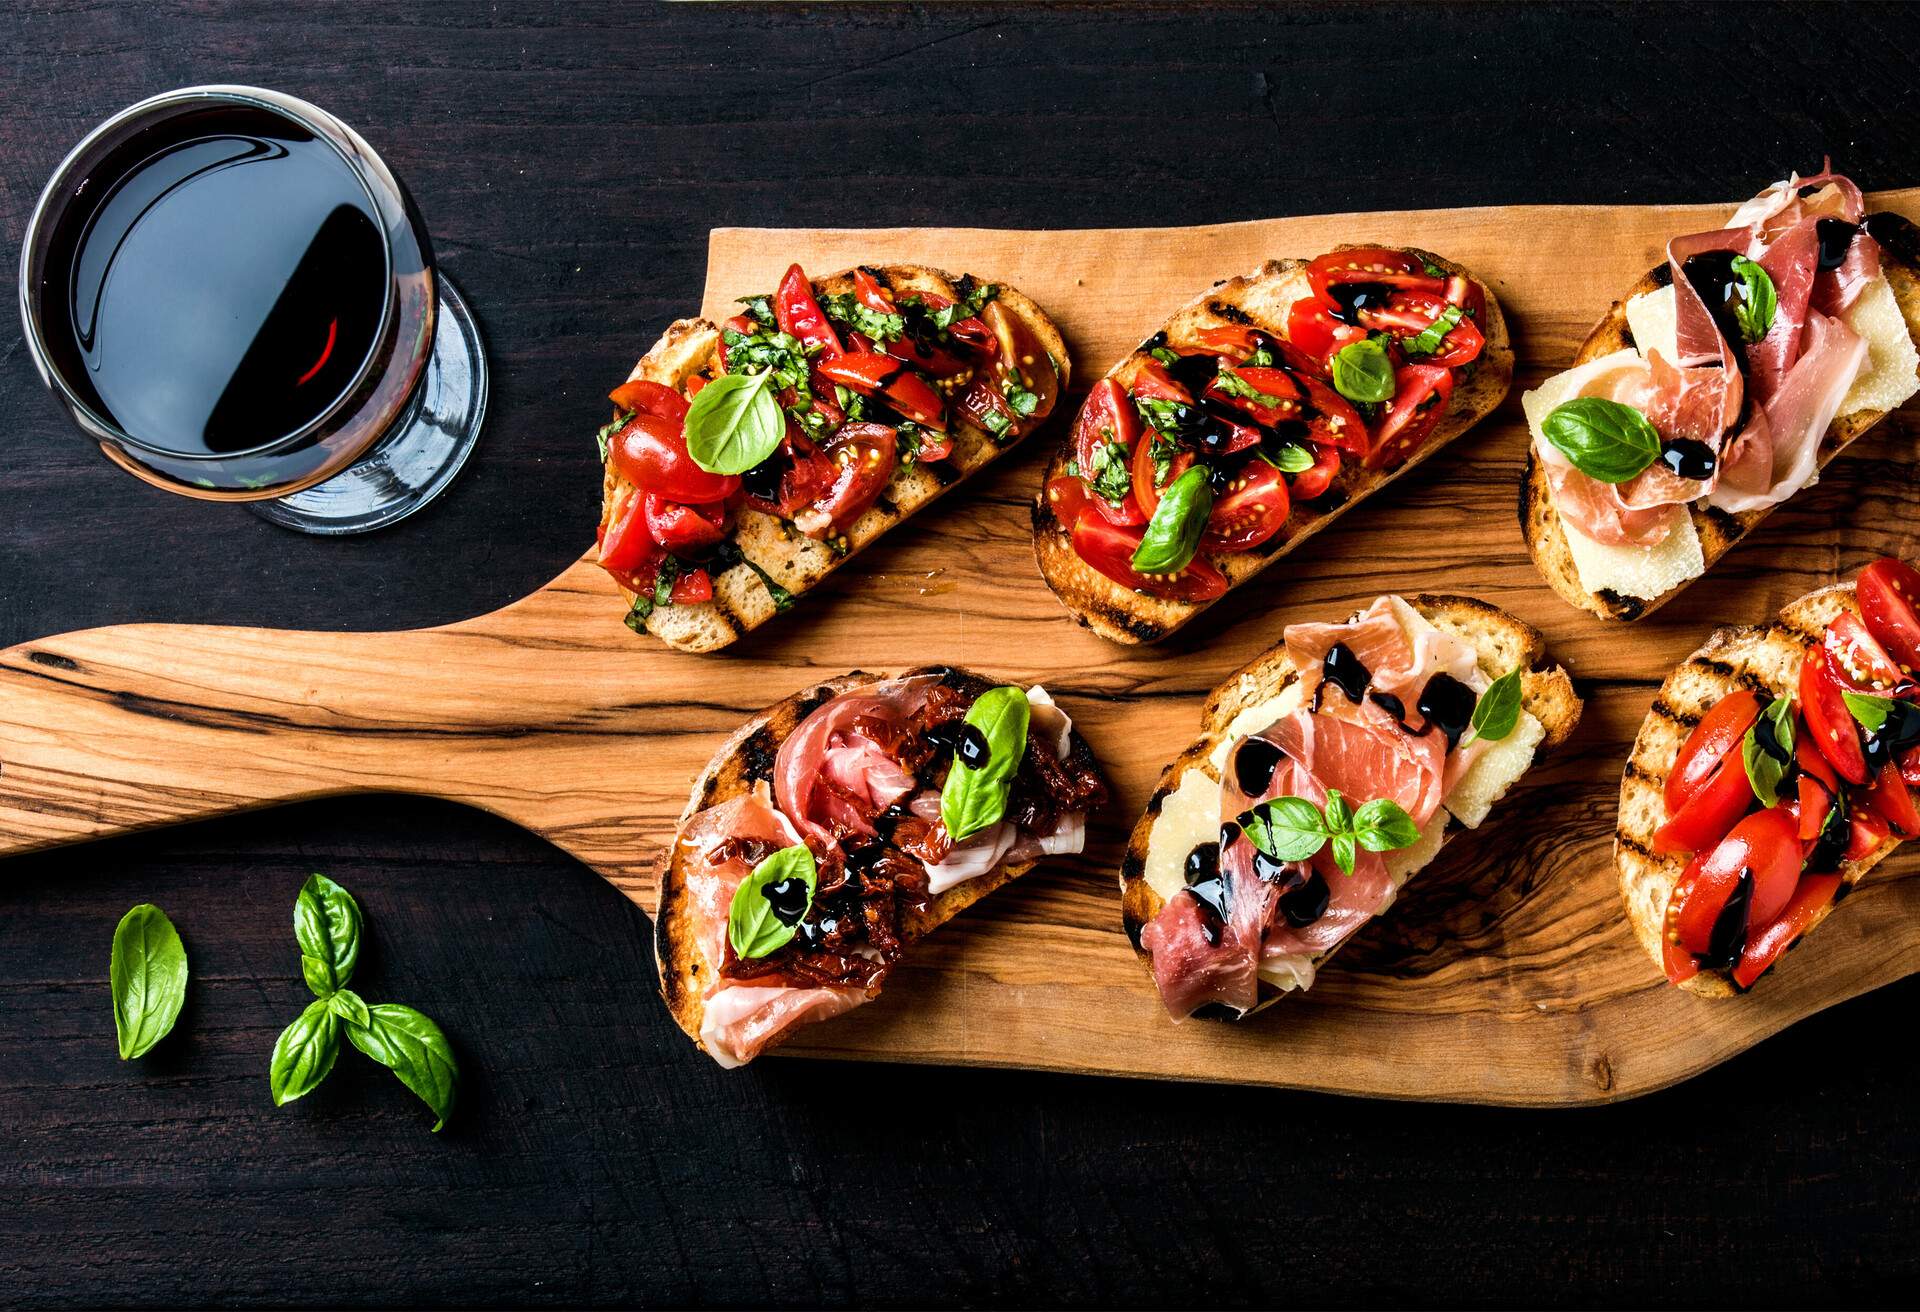 Brushetta set for wine. Variety of small sandwiches with prosciutto, tomatoes, parmesan cheese, fresh basil and balsamic creme served with glass of red wine on rustic wooden board over dark background, top view